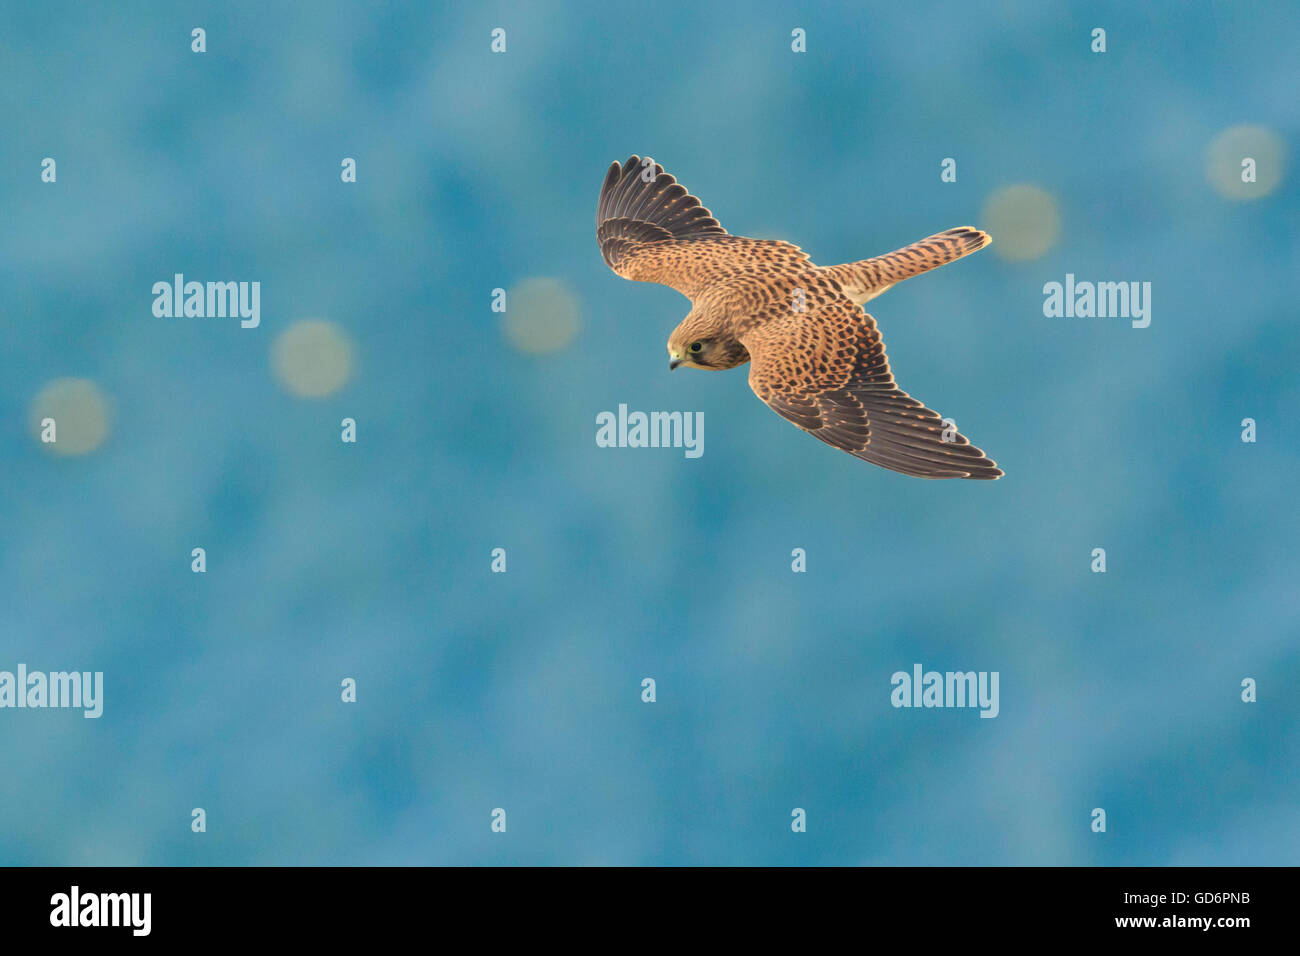 Common kestrel Falco tinnunculus flying over the sea with yellow floats on the background seen from above the bird of prey Stock Photo